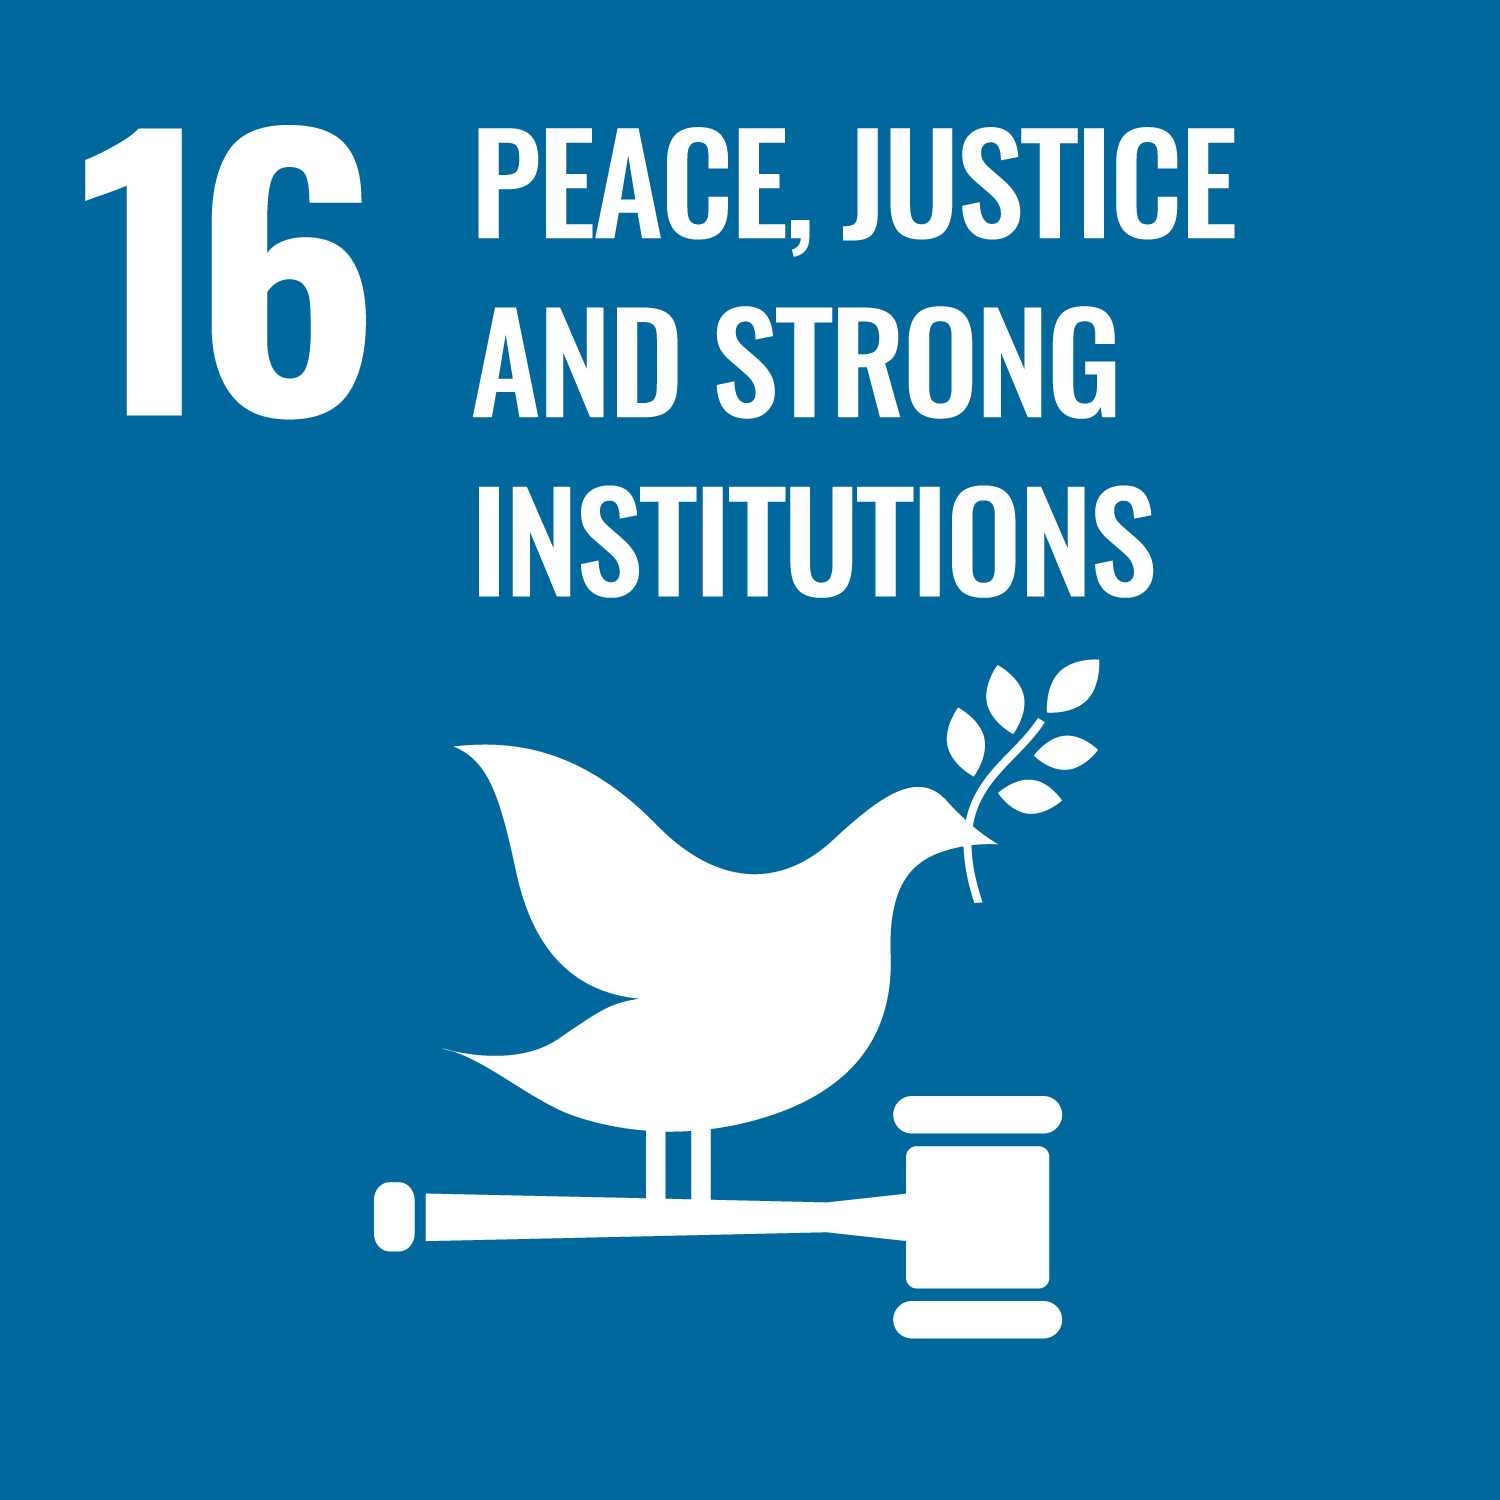 SDGs 和平、正義及健全制度-Peace, Justice and Strong Institutions圖示